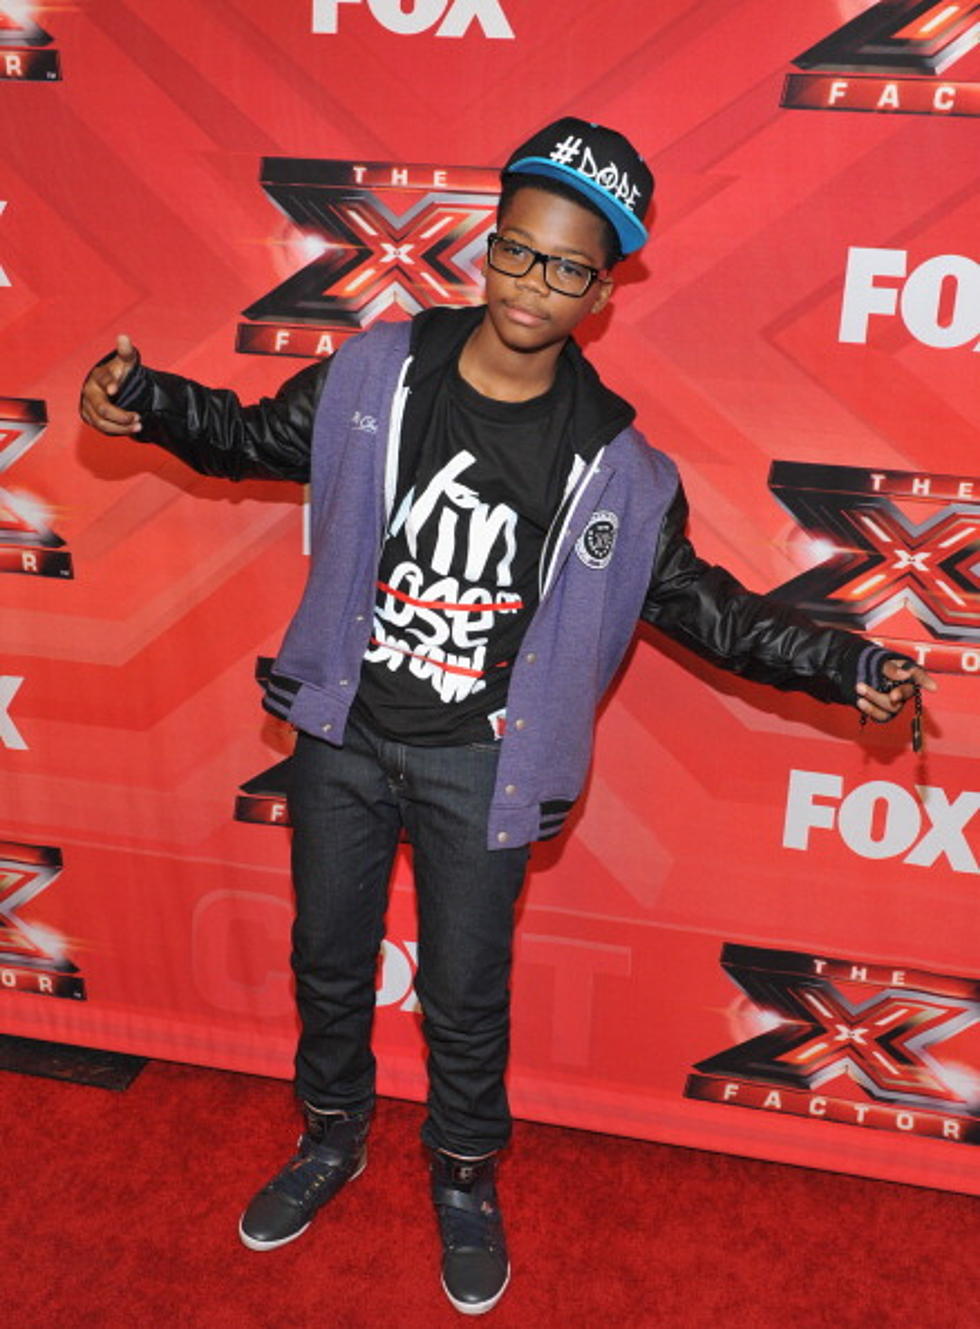 X-Factor’s Astro Signs Record Deal